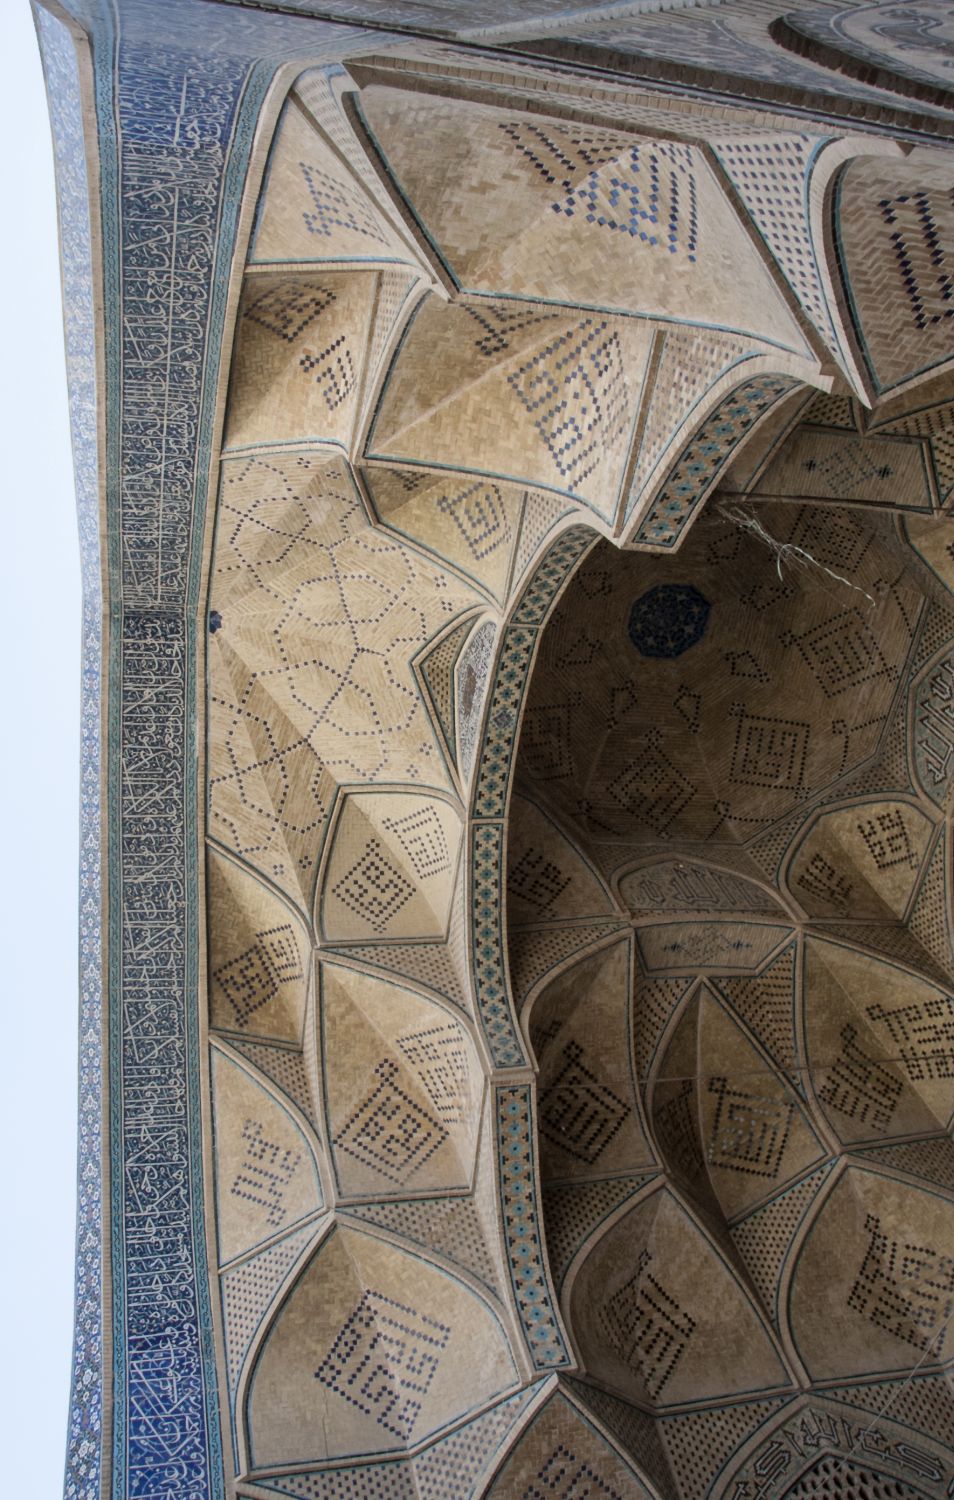 Southwest iwan, view of arch soffit and muqarnas vault from below.